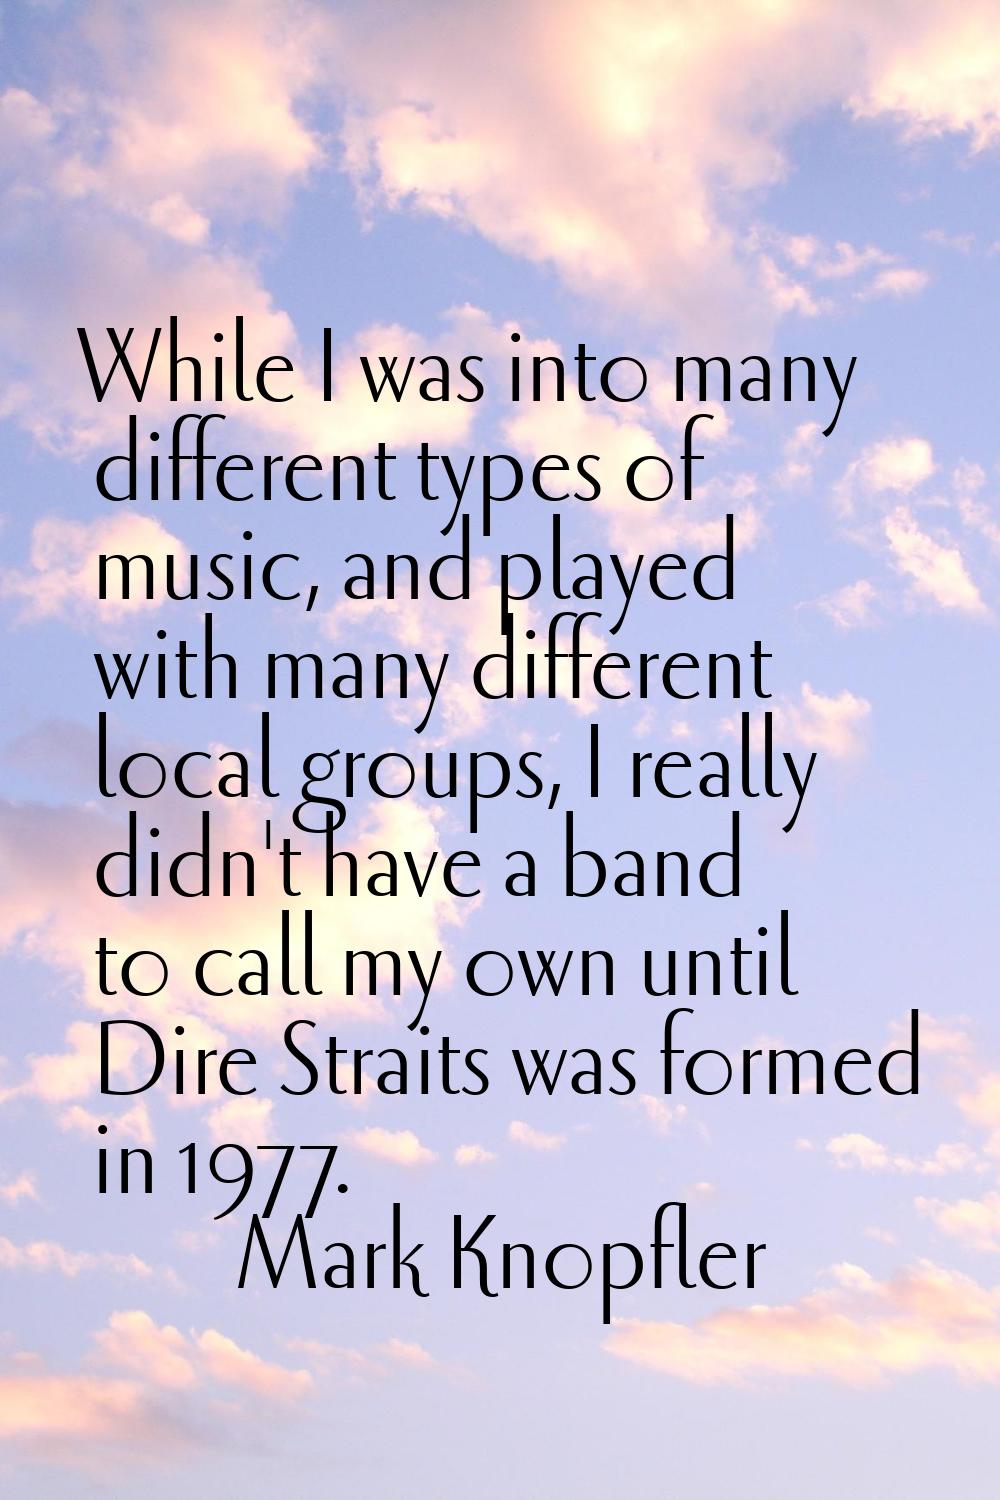 While I was into many different types of music, and played with many different local groups, I real